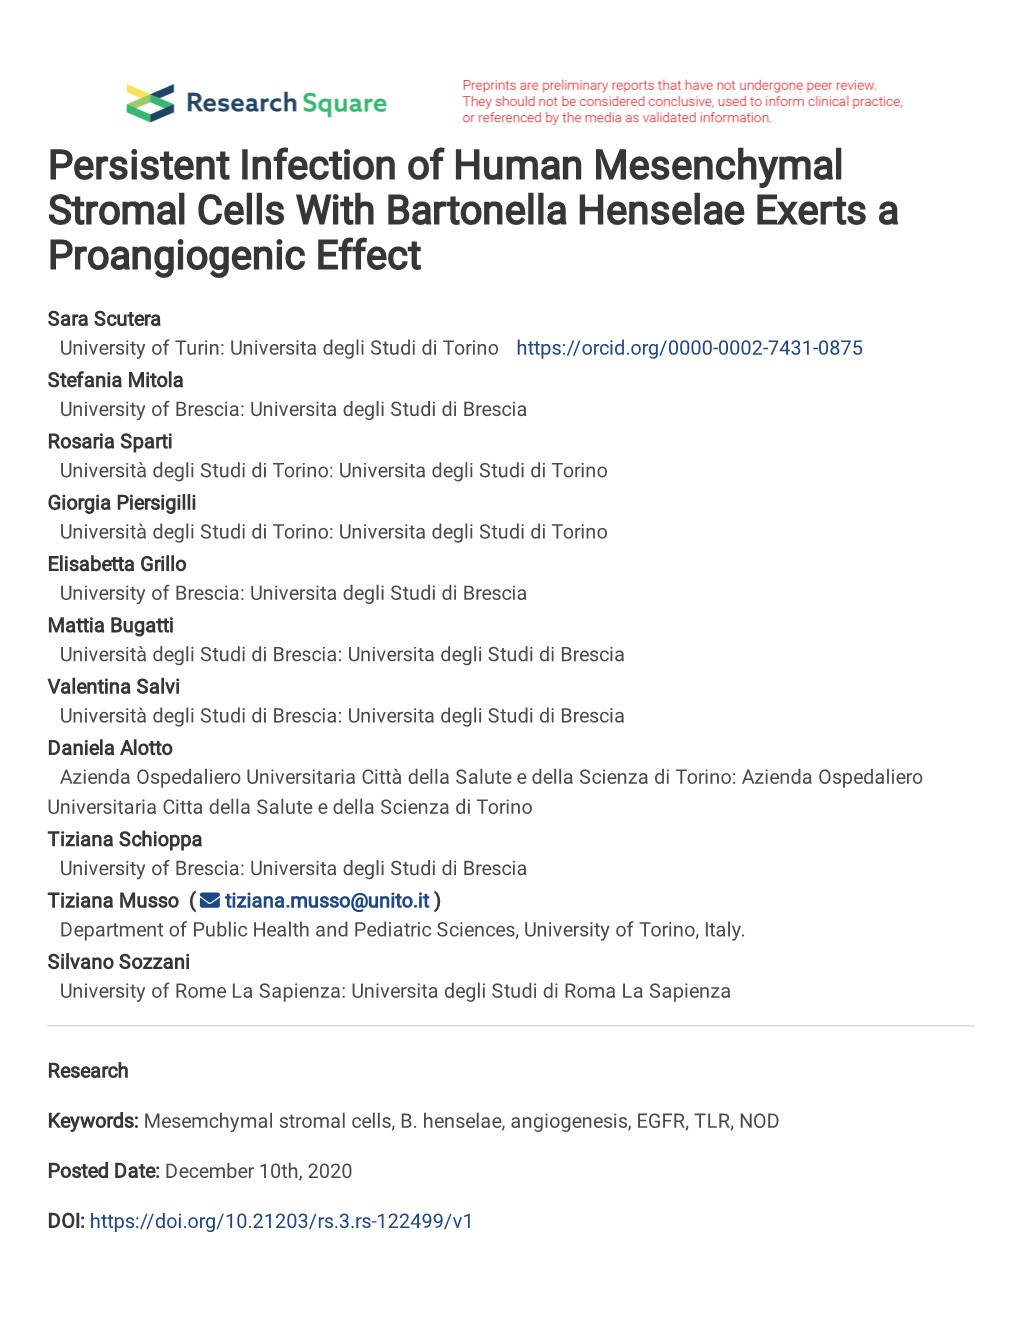 TITLE Persistent Infection of Human Mesenchymal Stromal Cells With